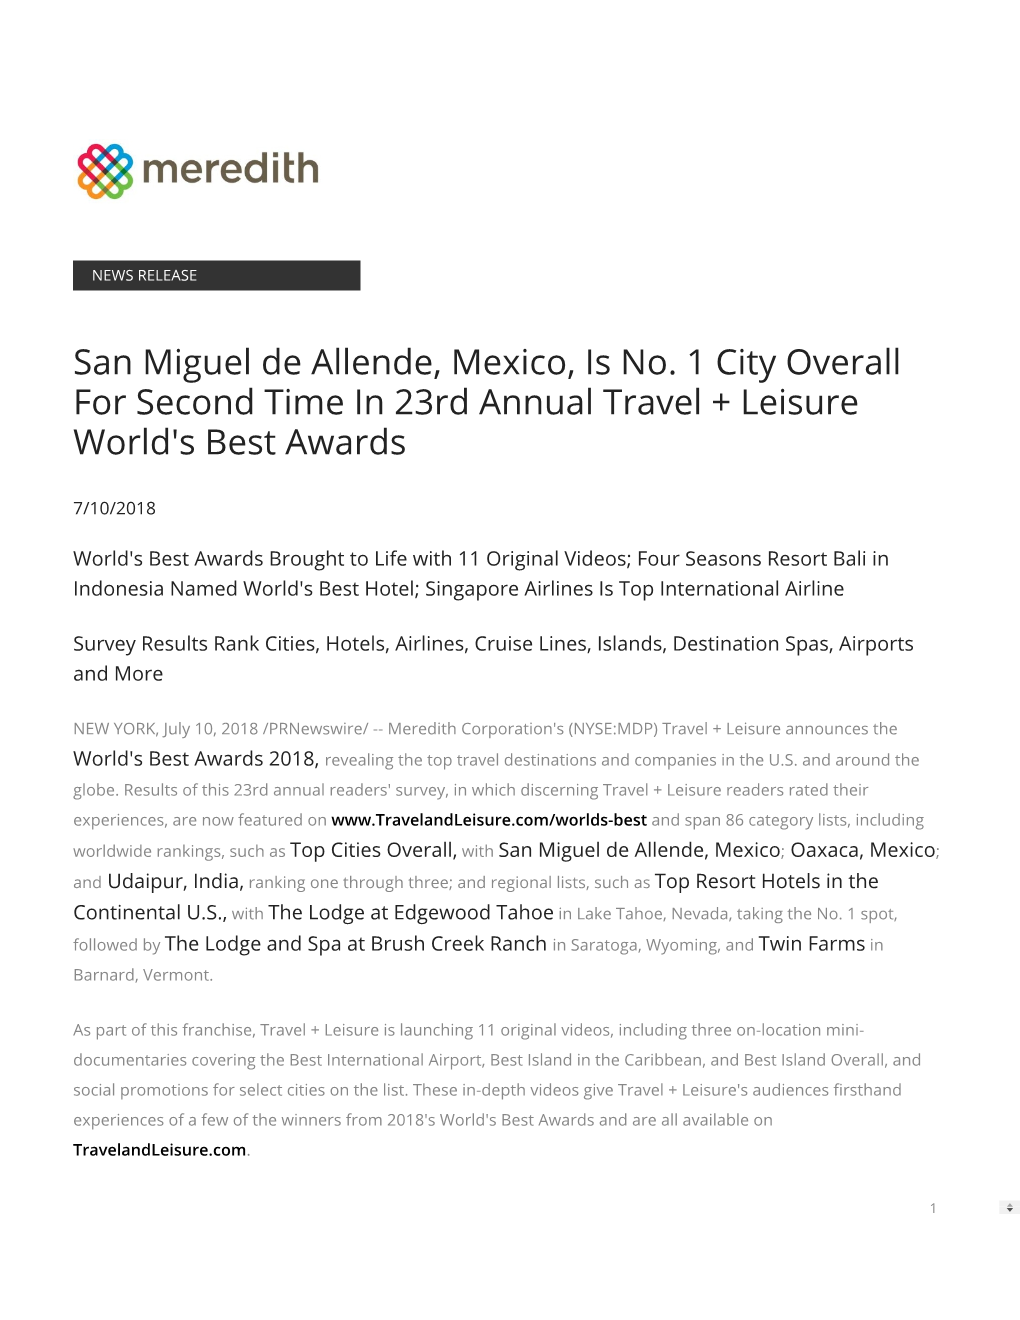 San Miguel De Allende, Mexico, Is No. 1 City Overall for Second Time in 23Rd Annual Travel + Leisure World's Best Awards